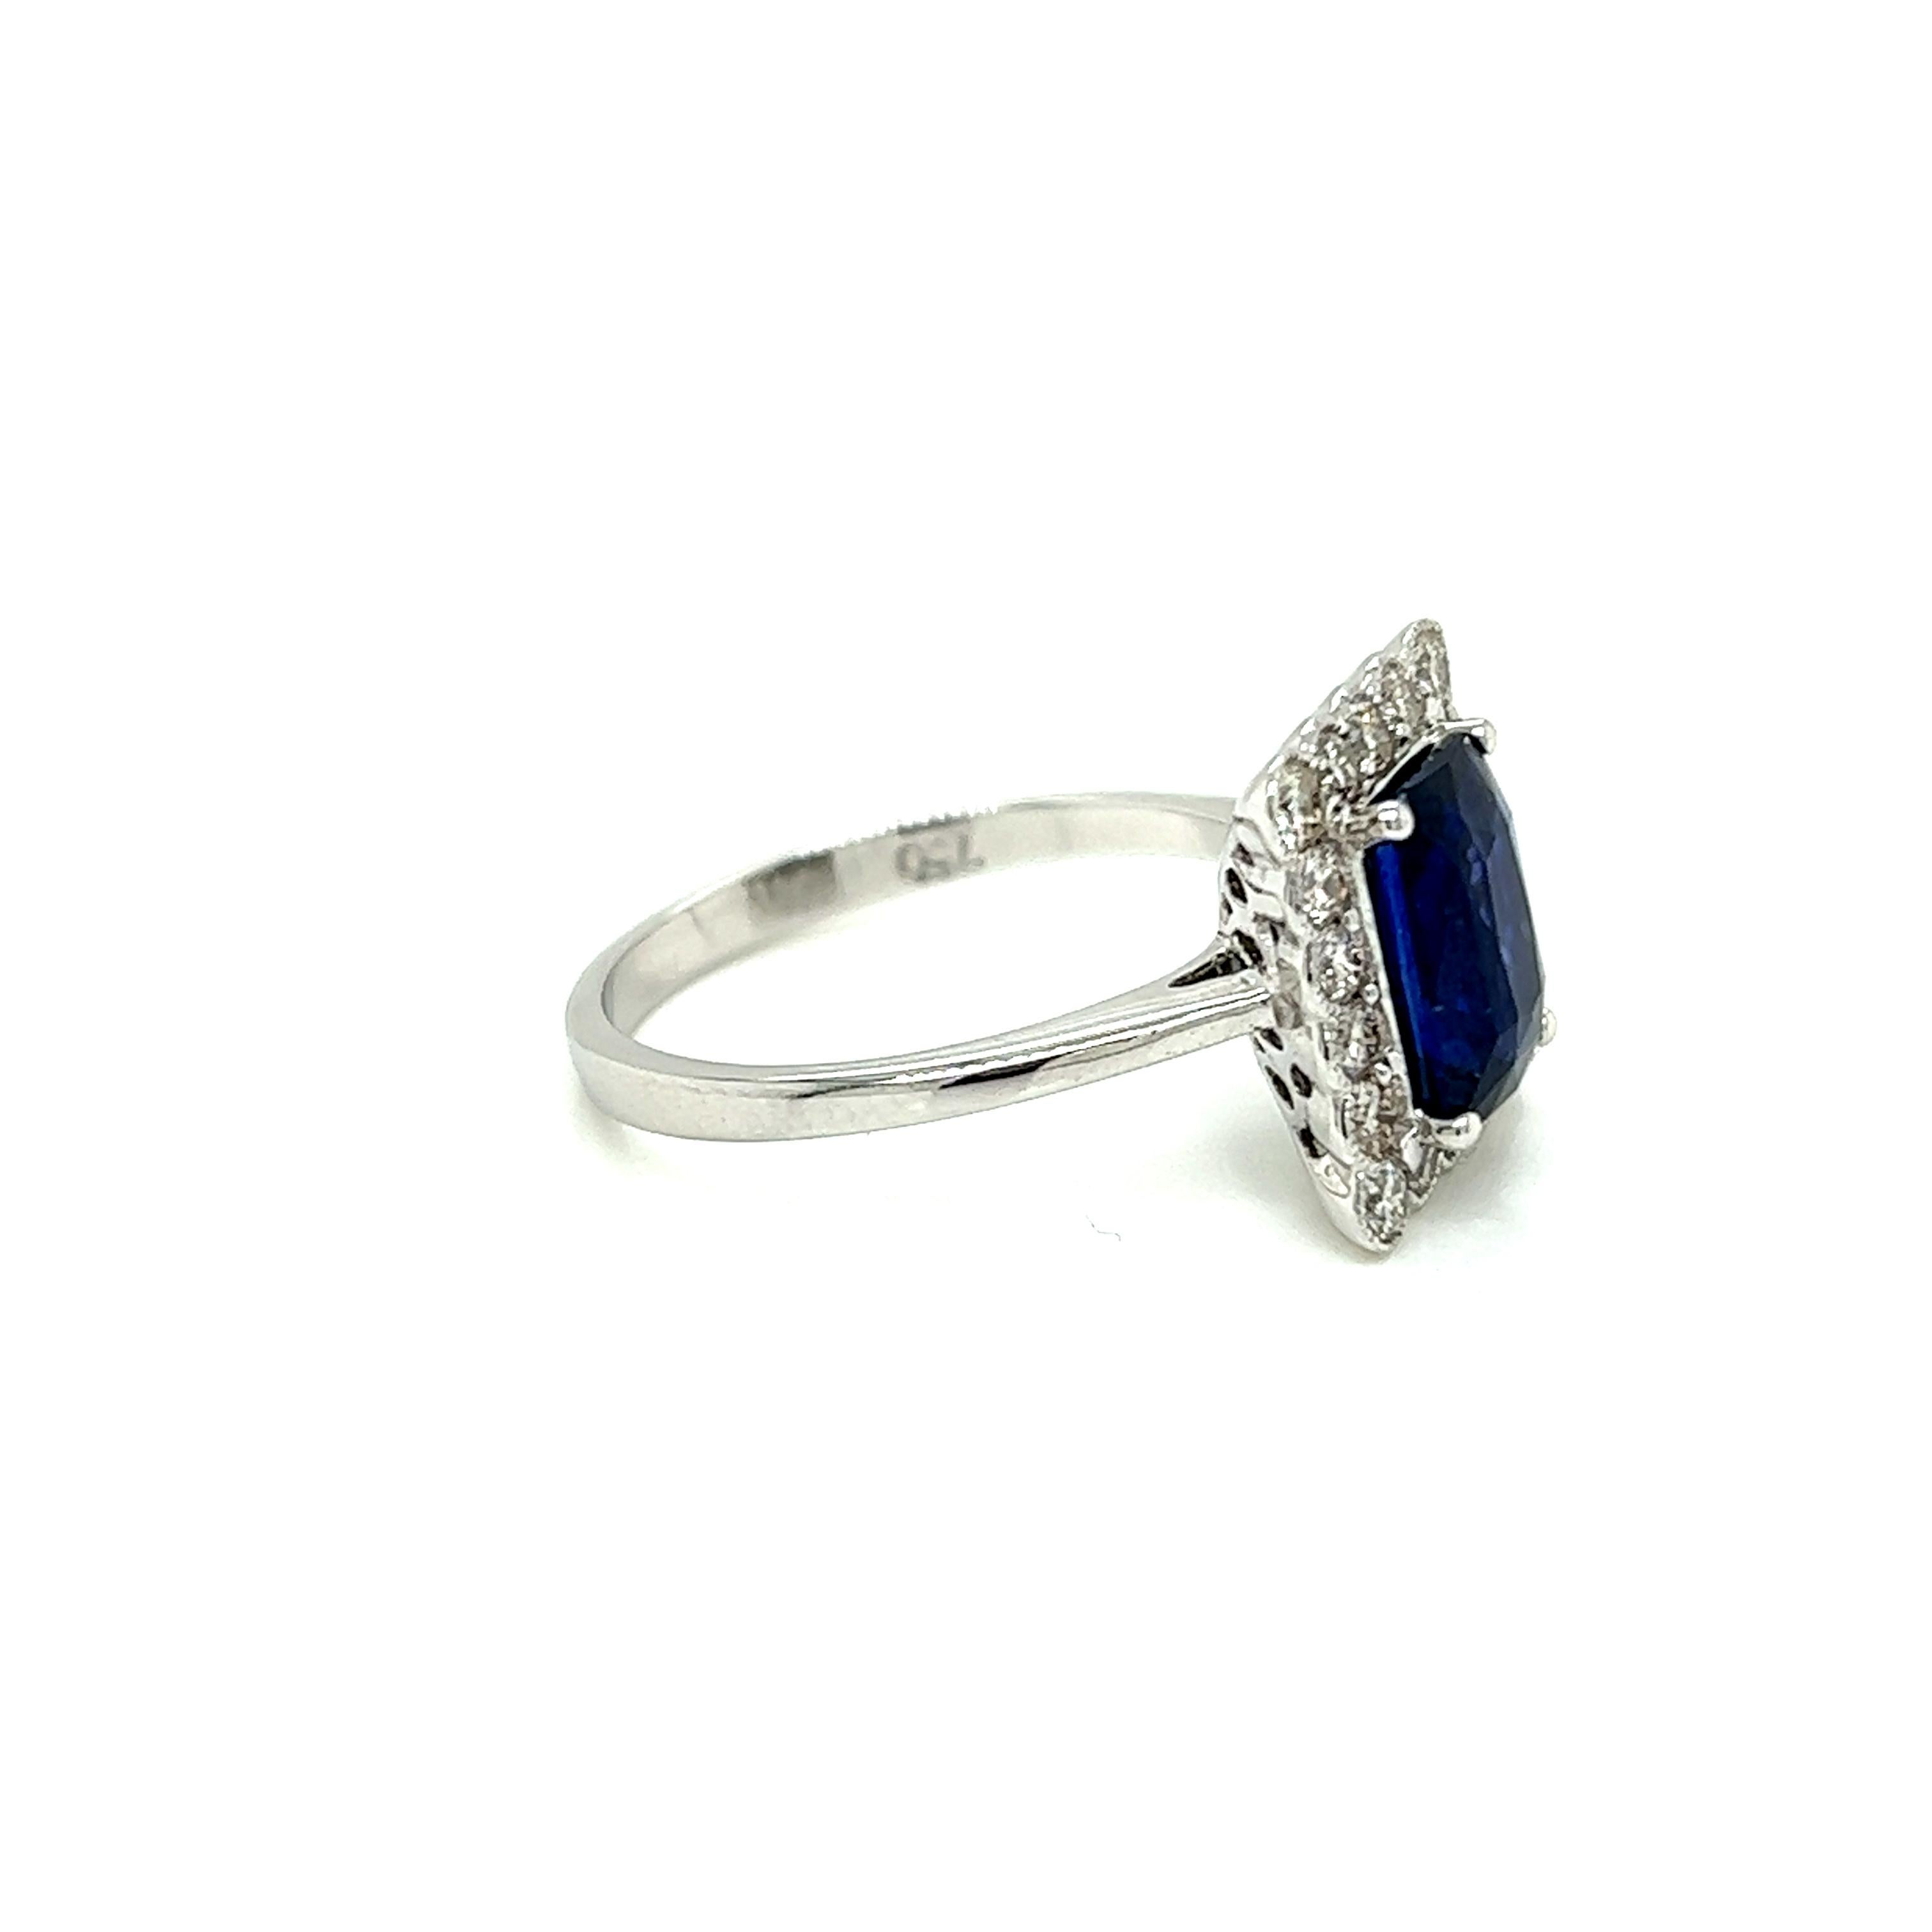 Women's 2.35 Carat Emerald cut Blue Sapphire and Diamond Cluster Ring in 18K White Gold For Sale